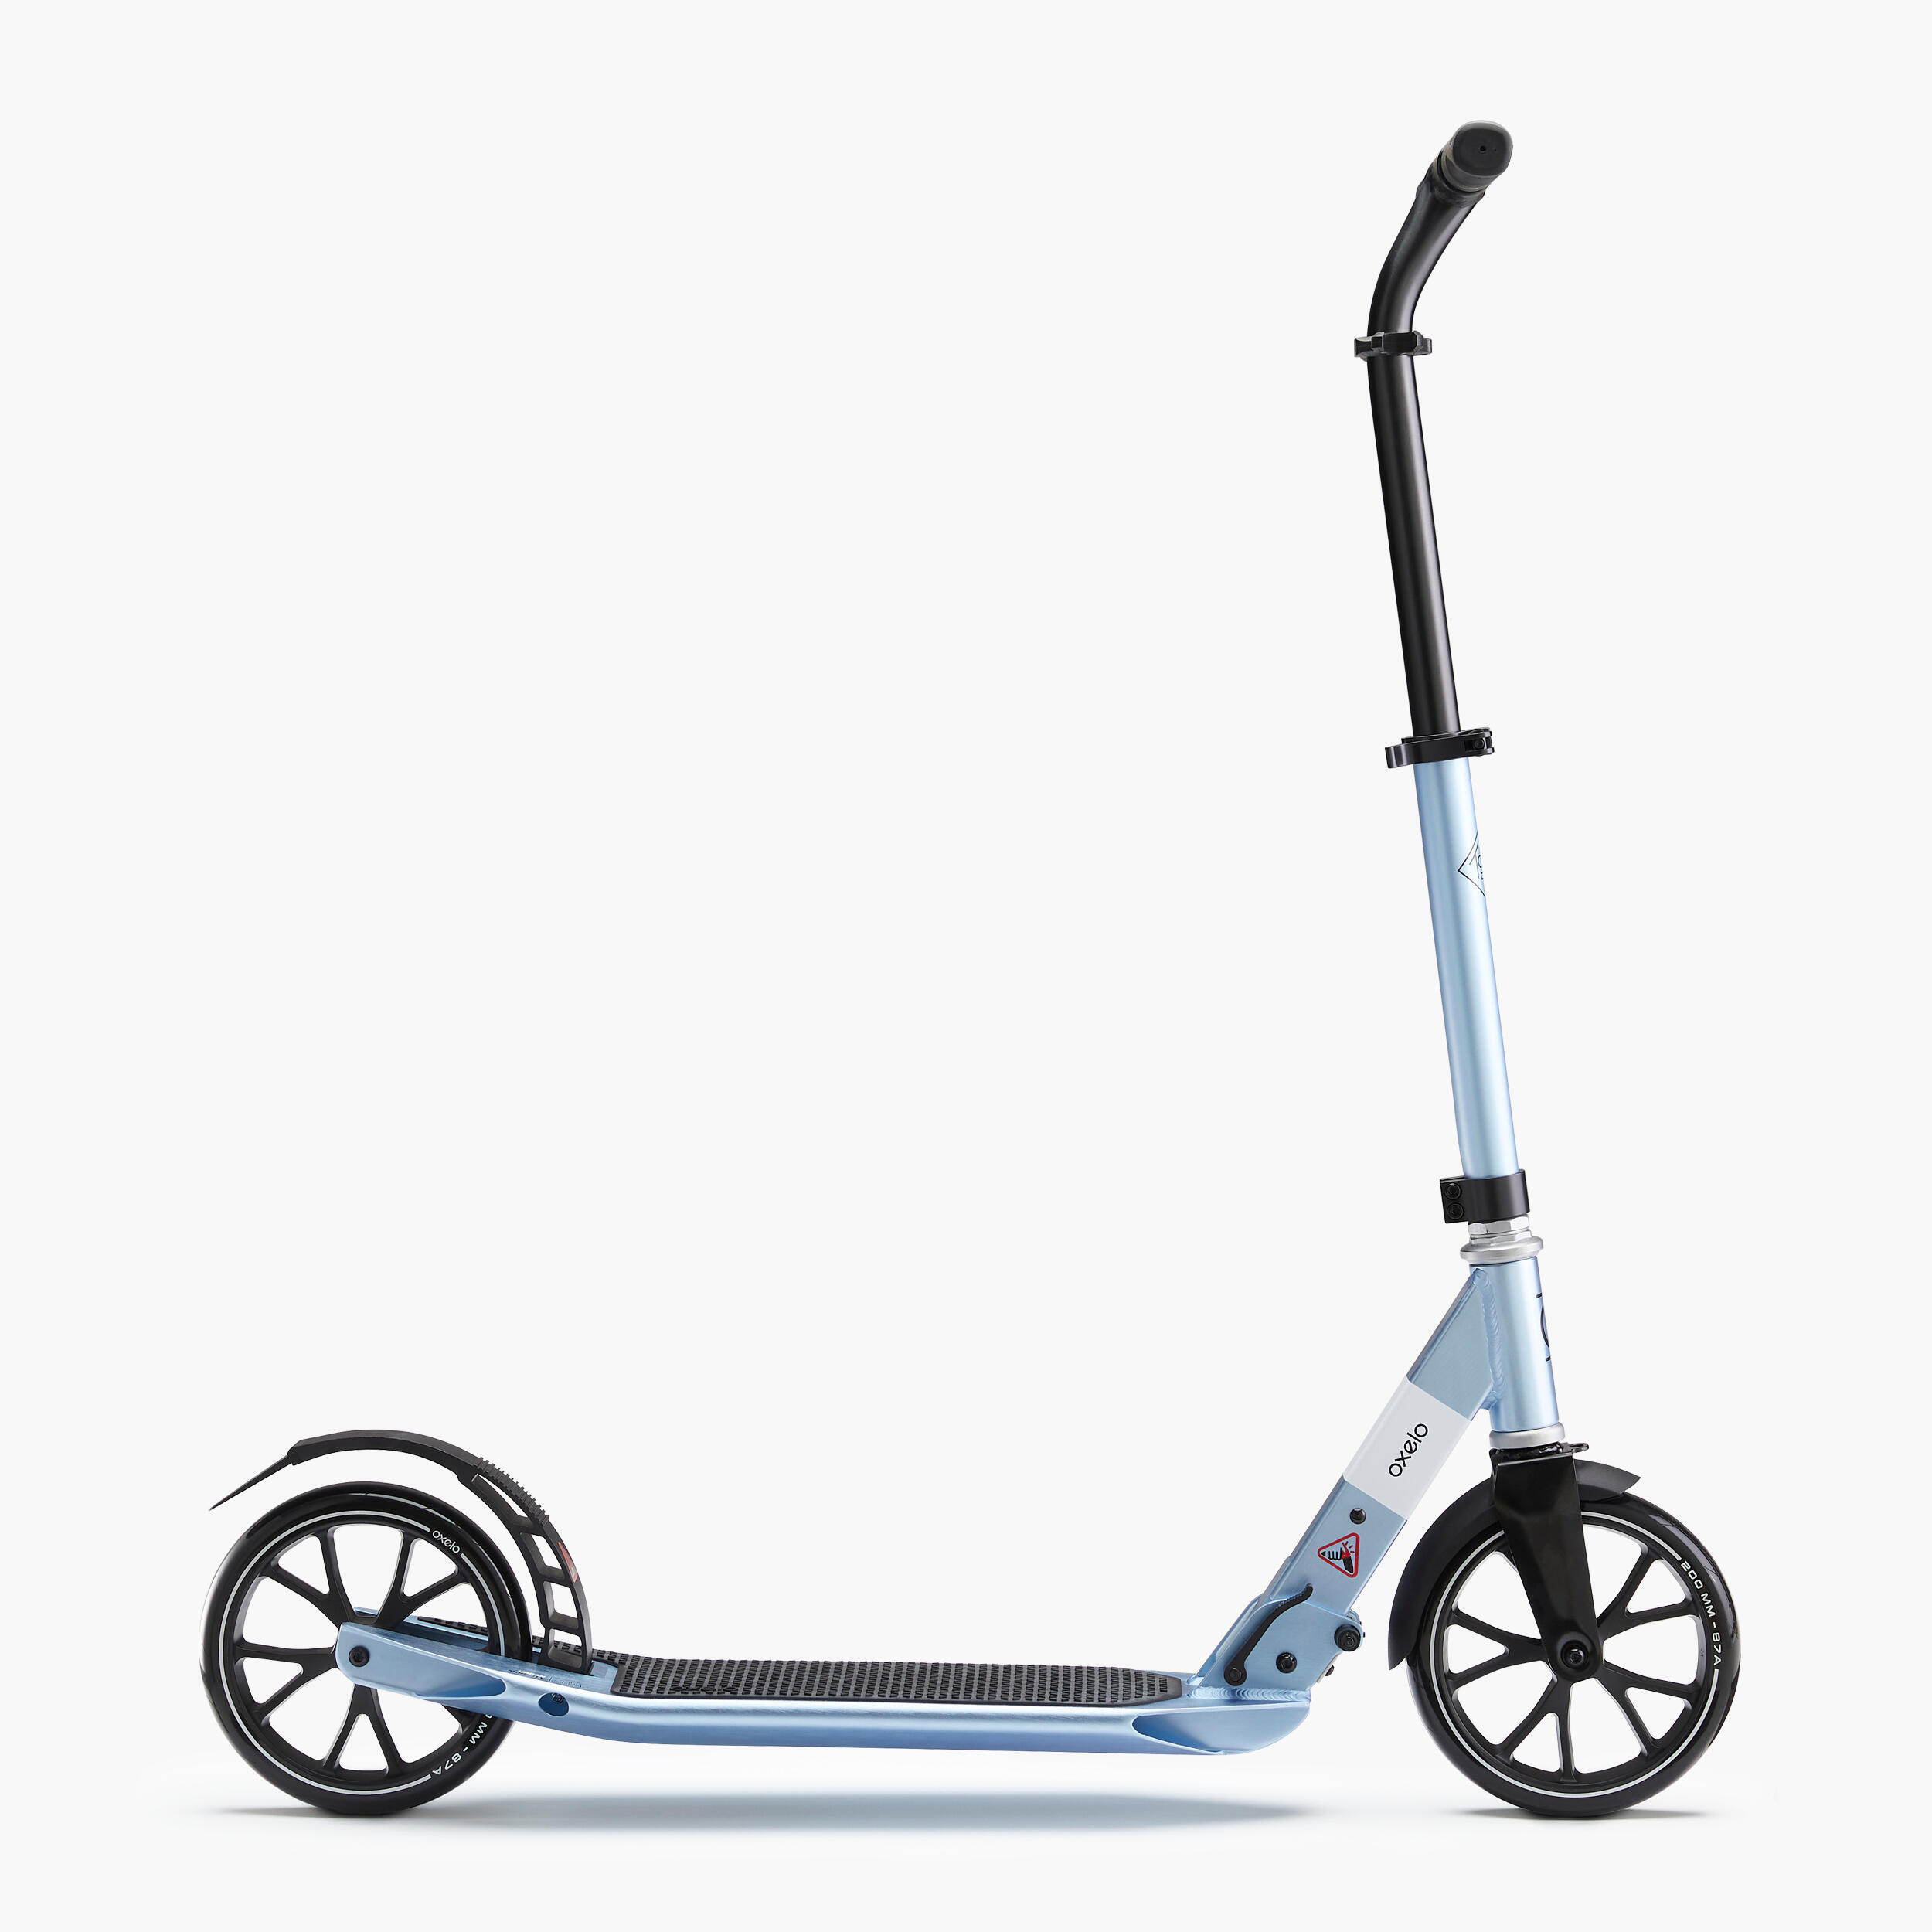 Town 5 XL Adult Scooter - Blue 2/10